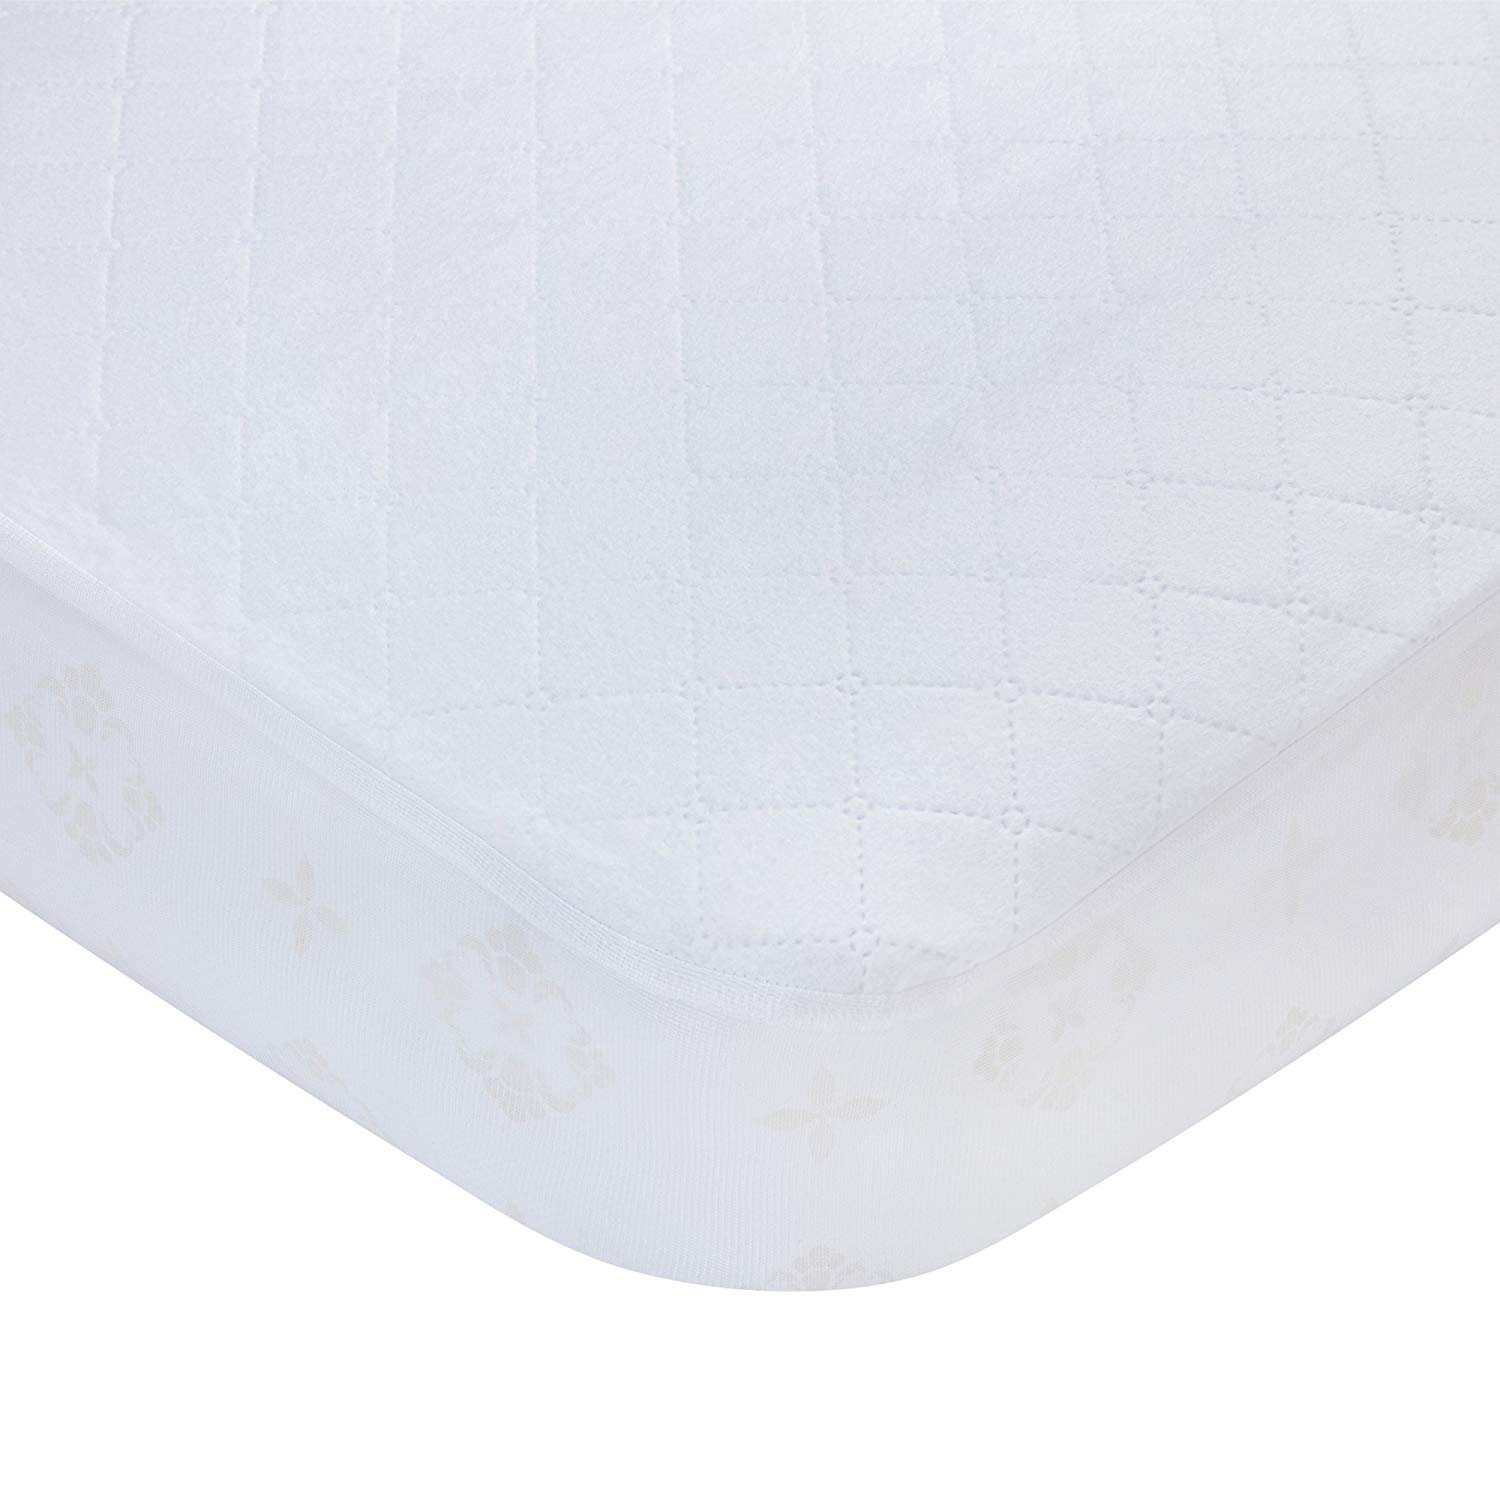 Wholesale Bamboo Cotton Terry Quilted  Queen Size Waterproof Mattress Cover Protector